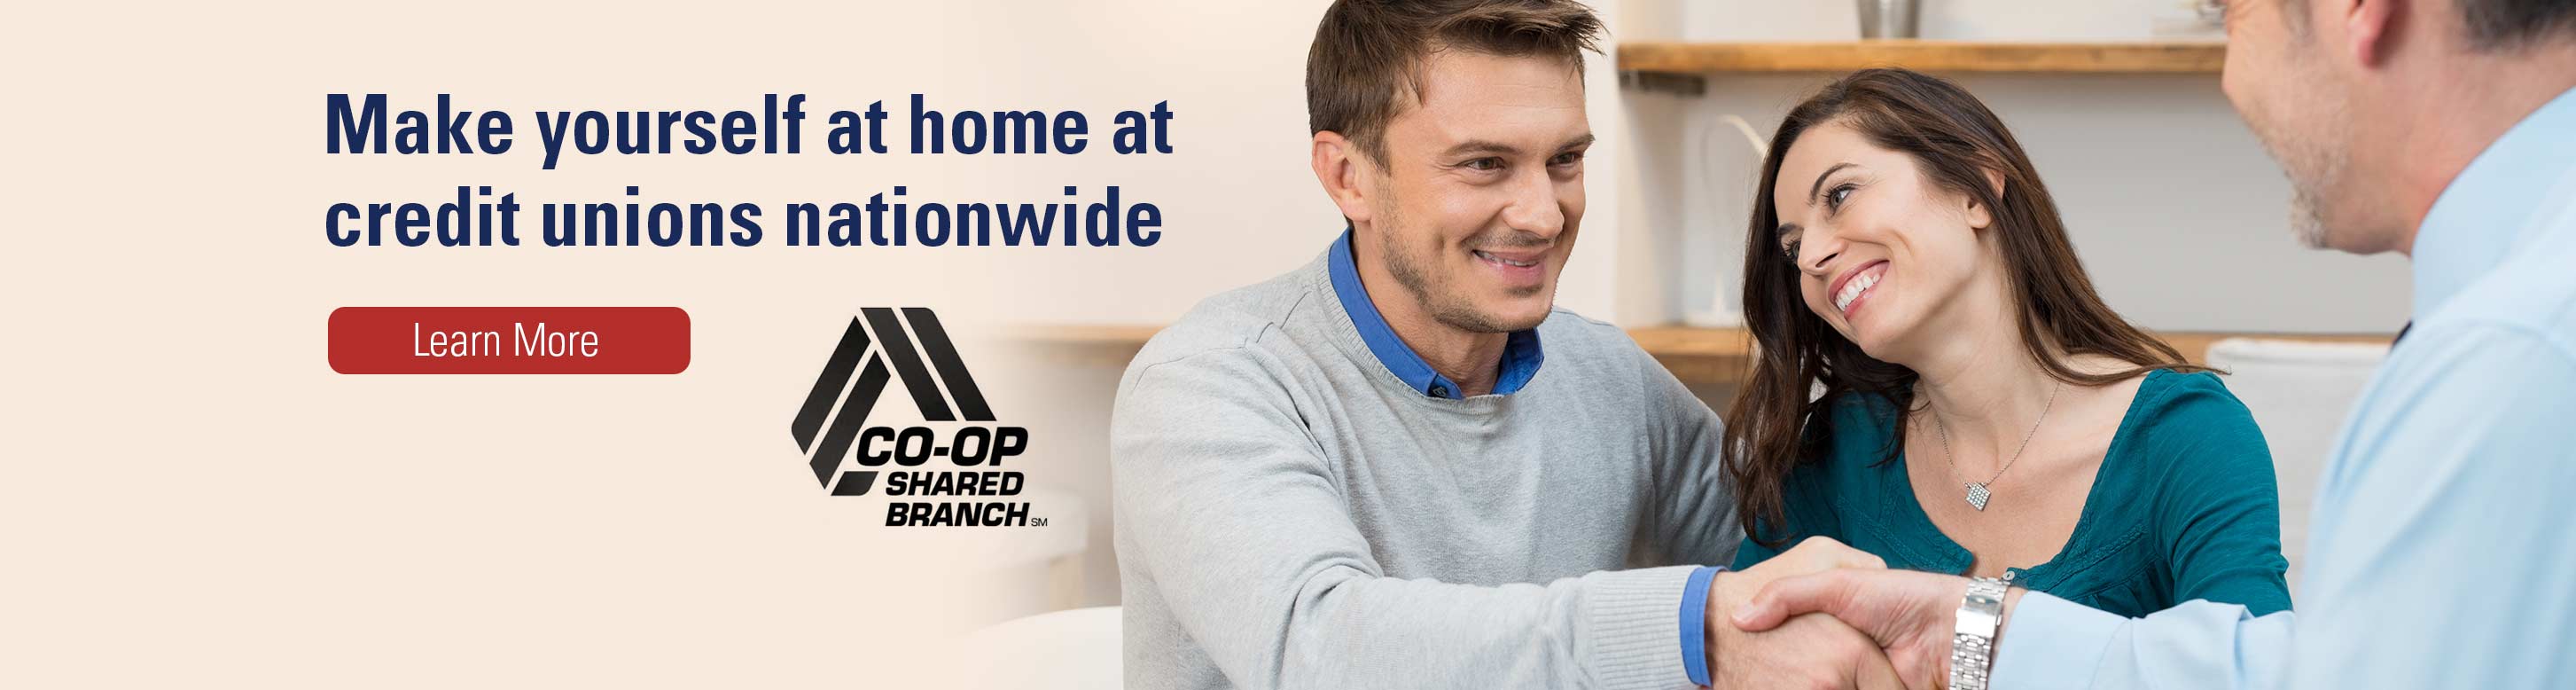 Make yourself at home at credit unions available nationwide. Learn more. Co-op shared branch.